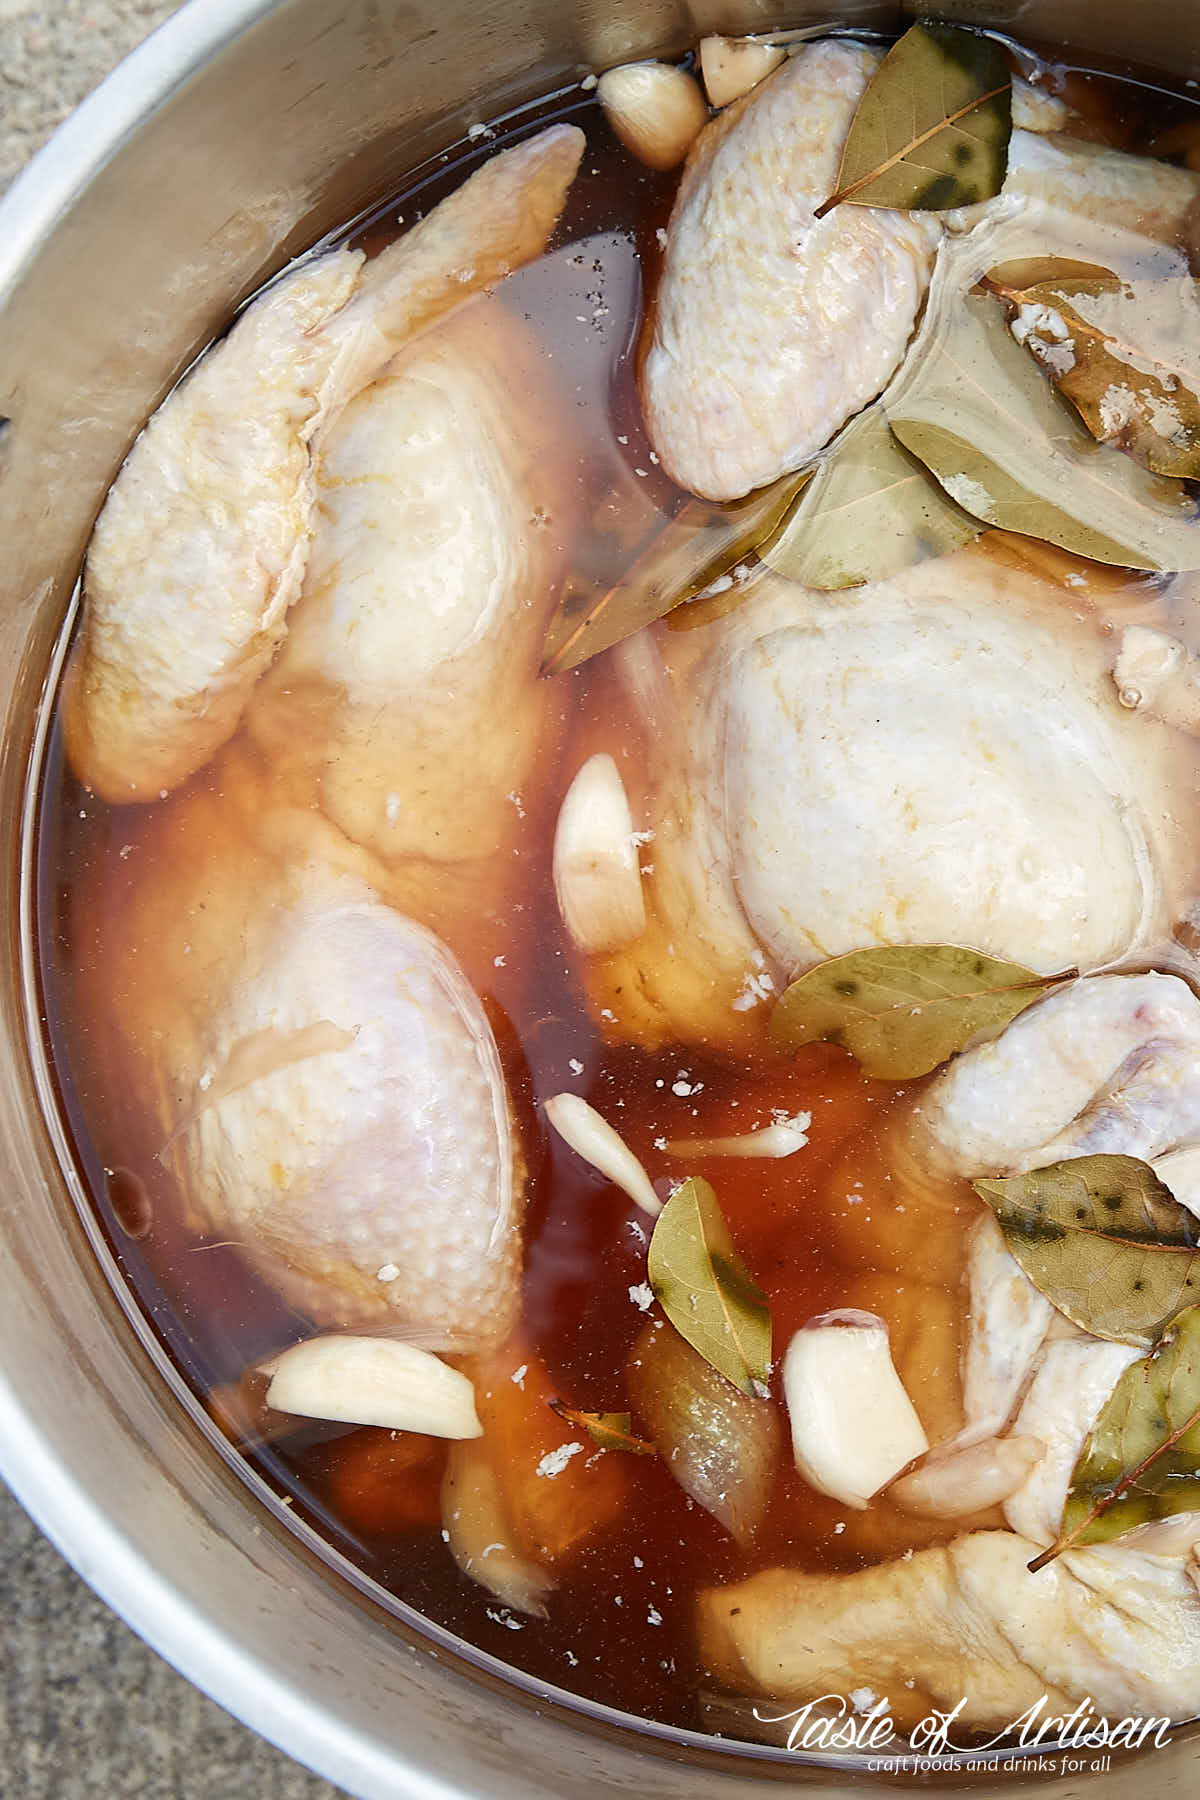 Chicken soaking in brine flavored with vegetables and spices.